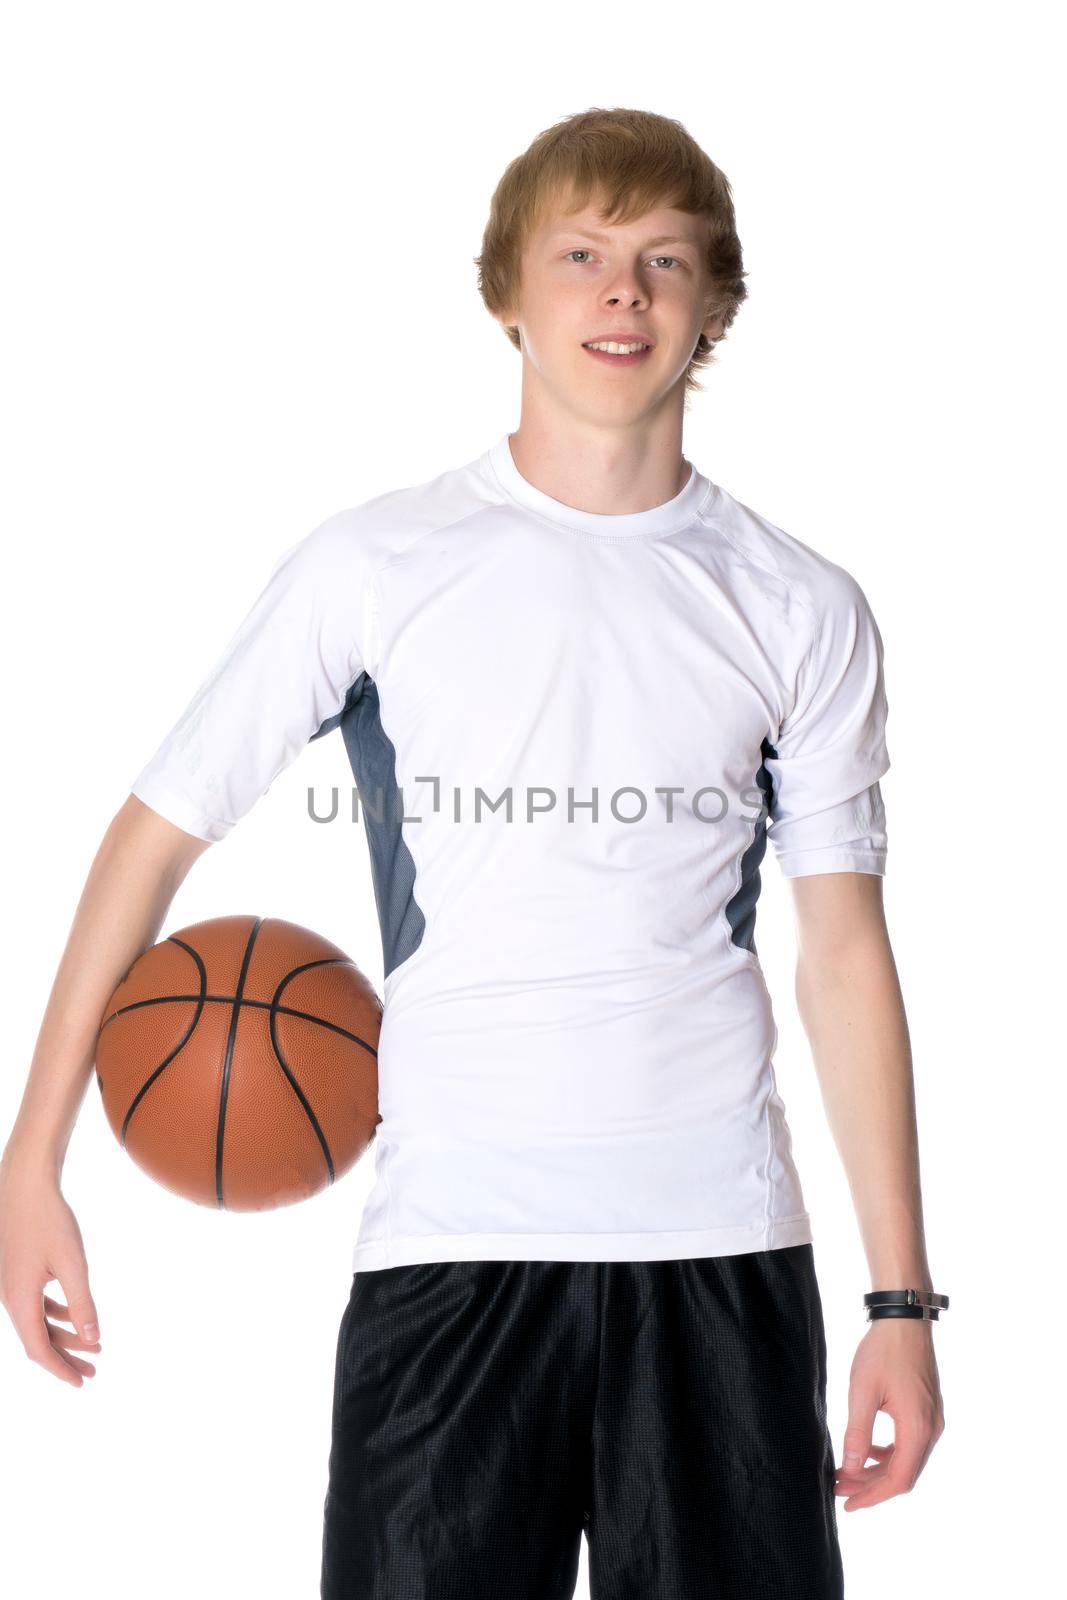 A young red-haired guy playing basketball. The concept of sport, fitness, healthy lifestyle. Isolated on white background.